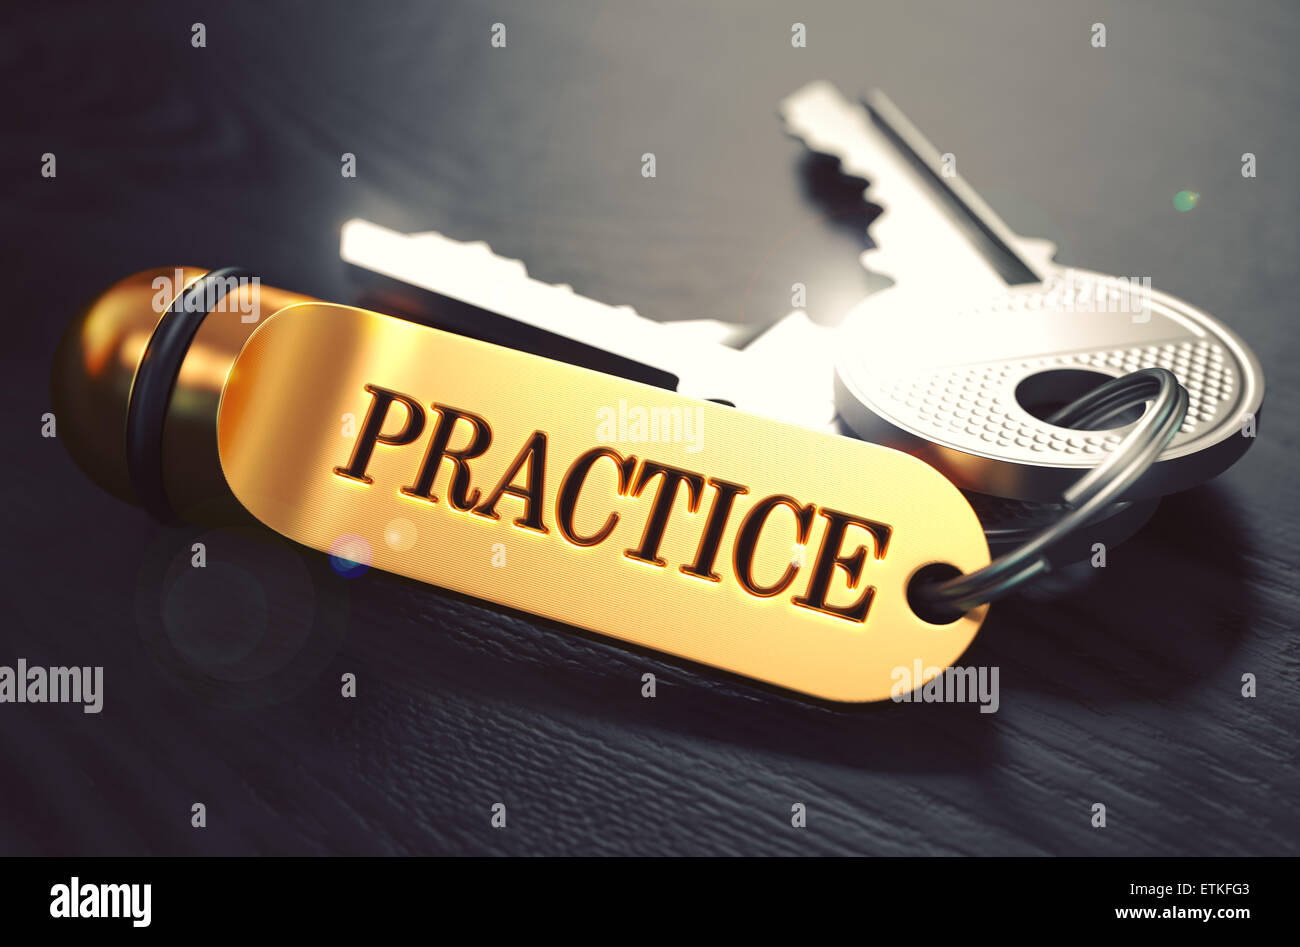 Practice - Bunch of Keys with Text on Golden Keychain. Stock Photo